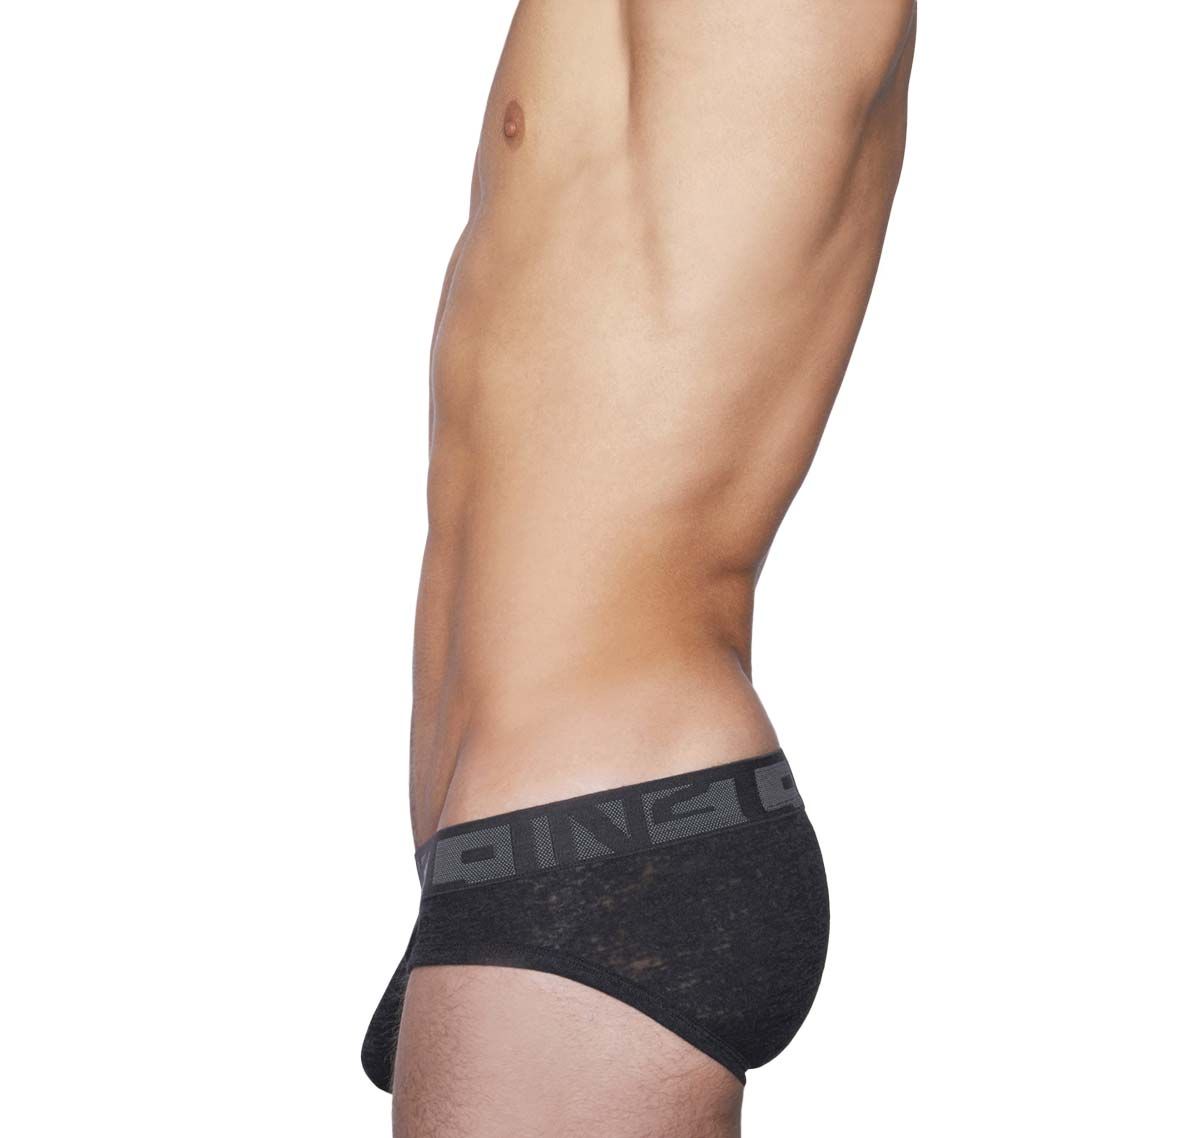 C-IN2 Slip HAND ME DOWN LOW RISE BRIEF 1913-017, gris oscuro